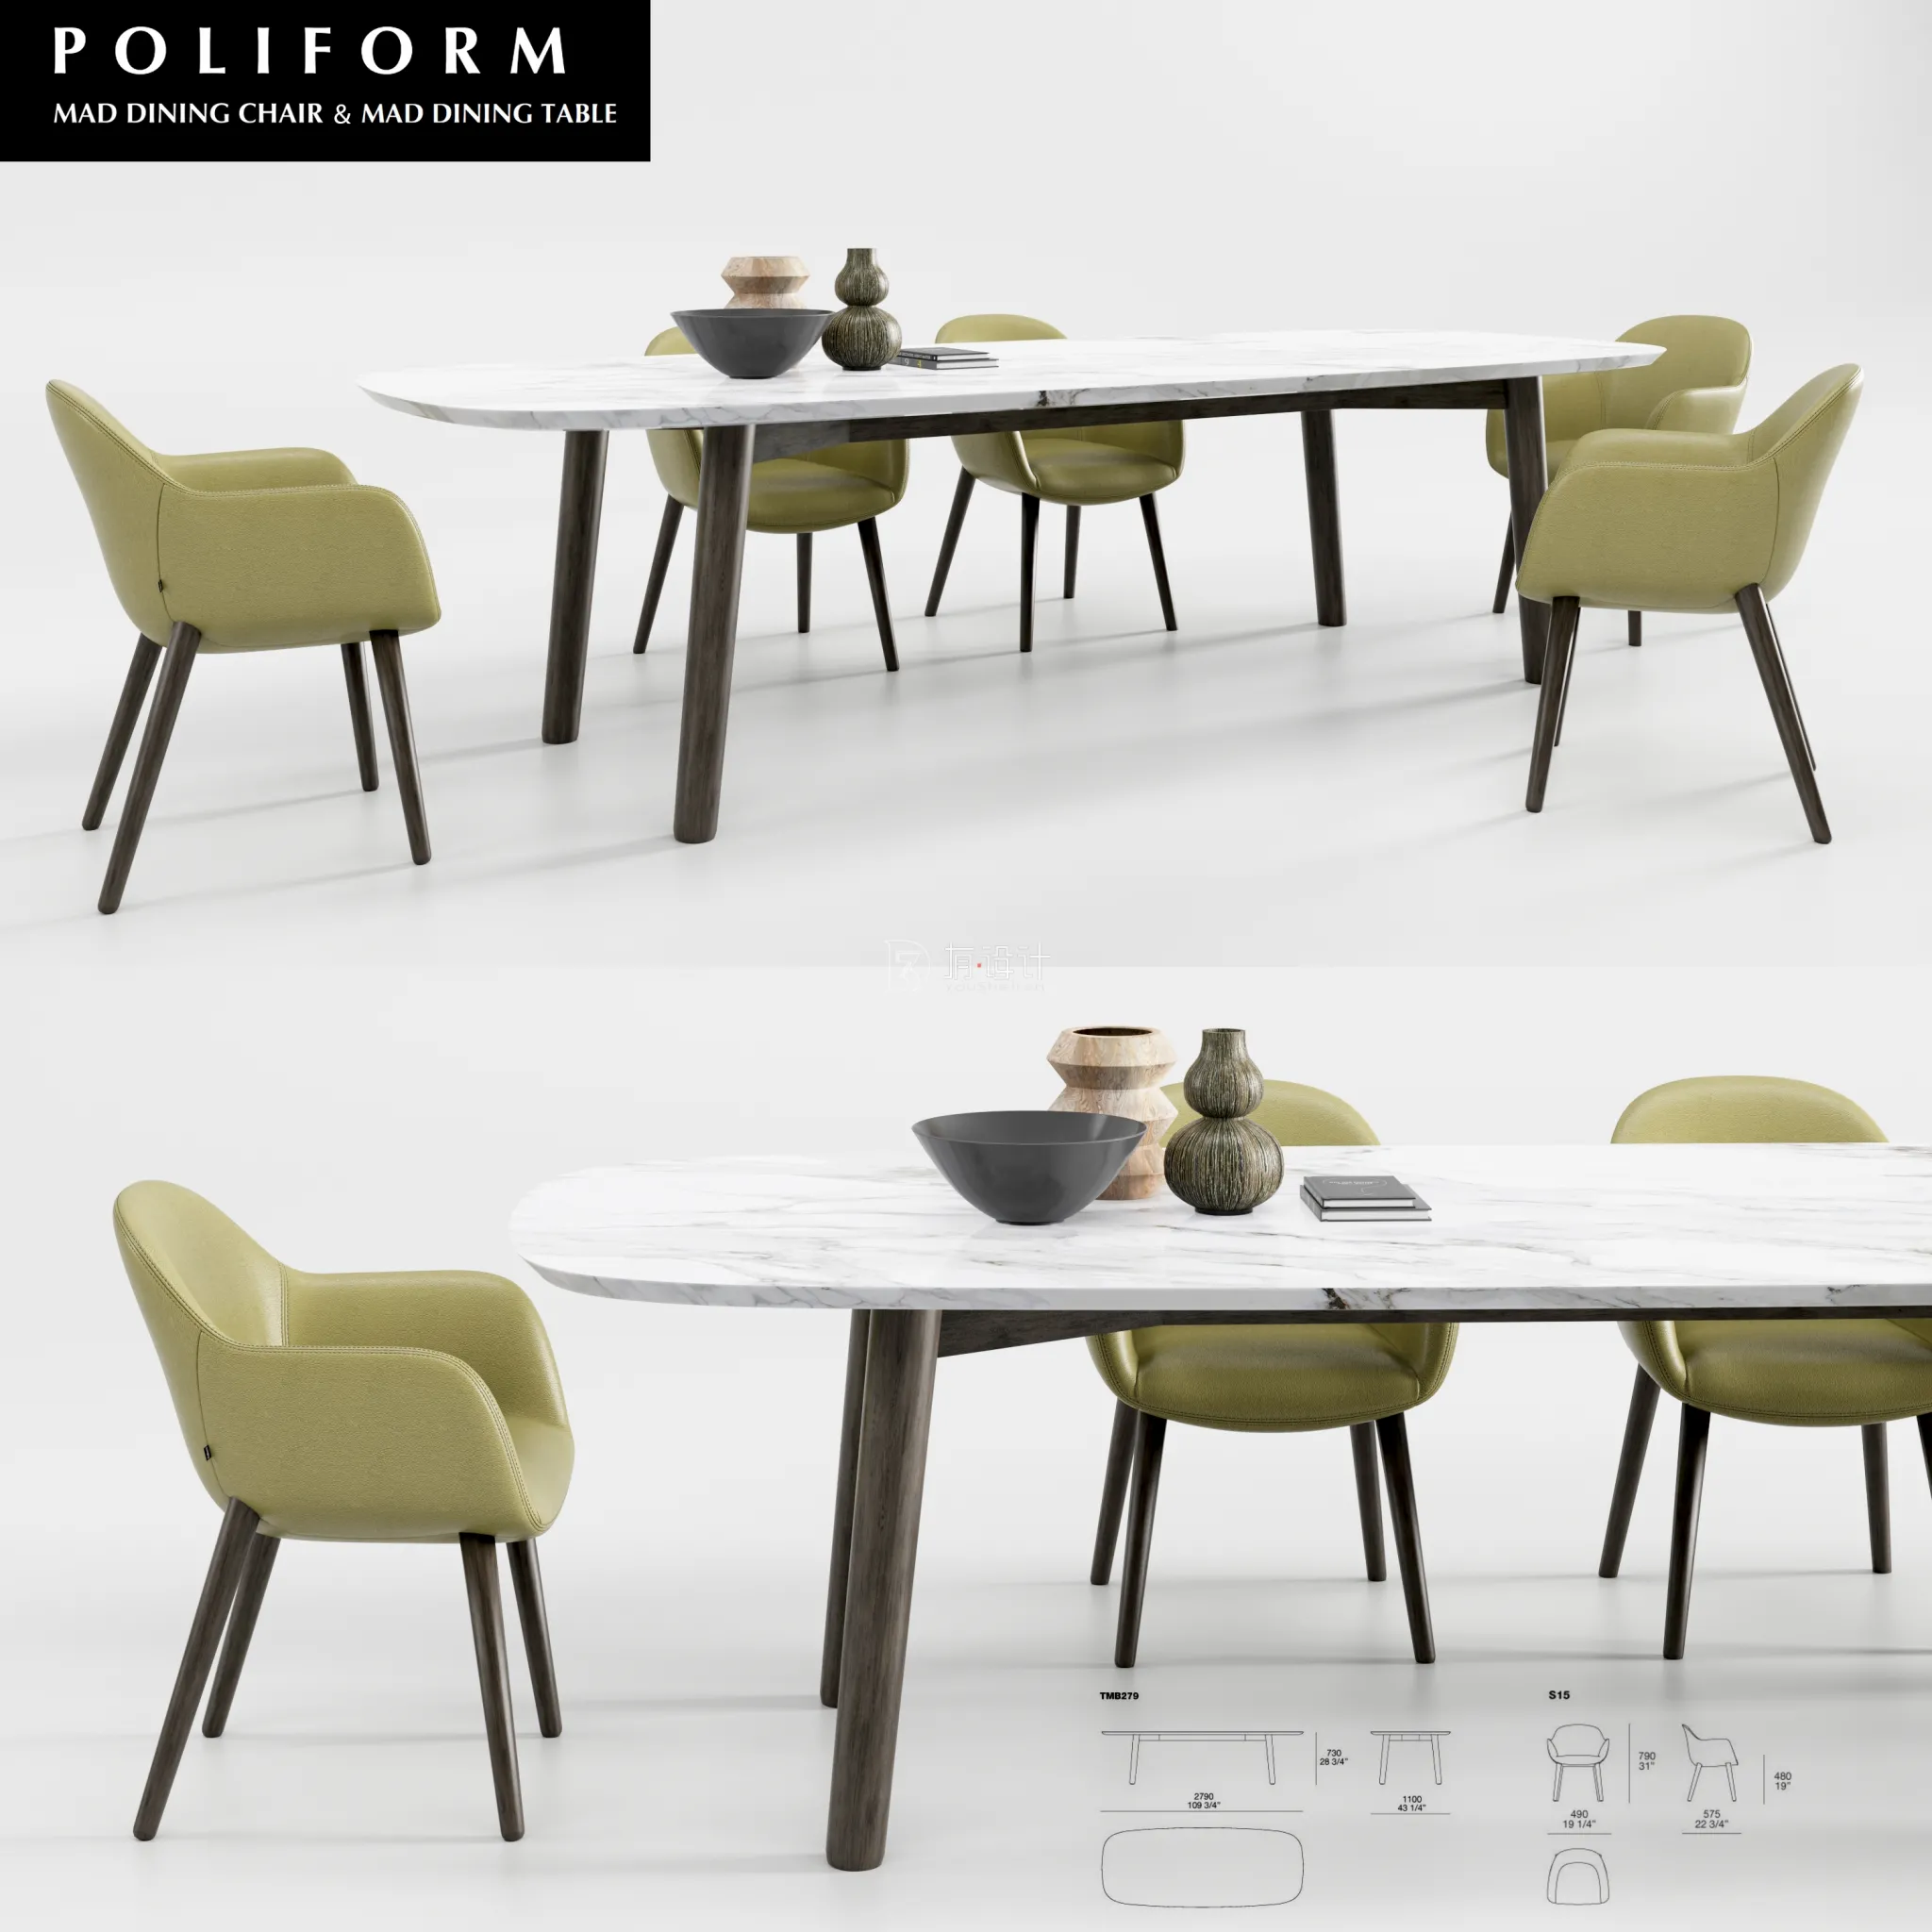 Furniture – Table and Chairs (Set) – 3D Models – PoliformMadDiningChairAndTable